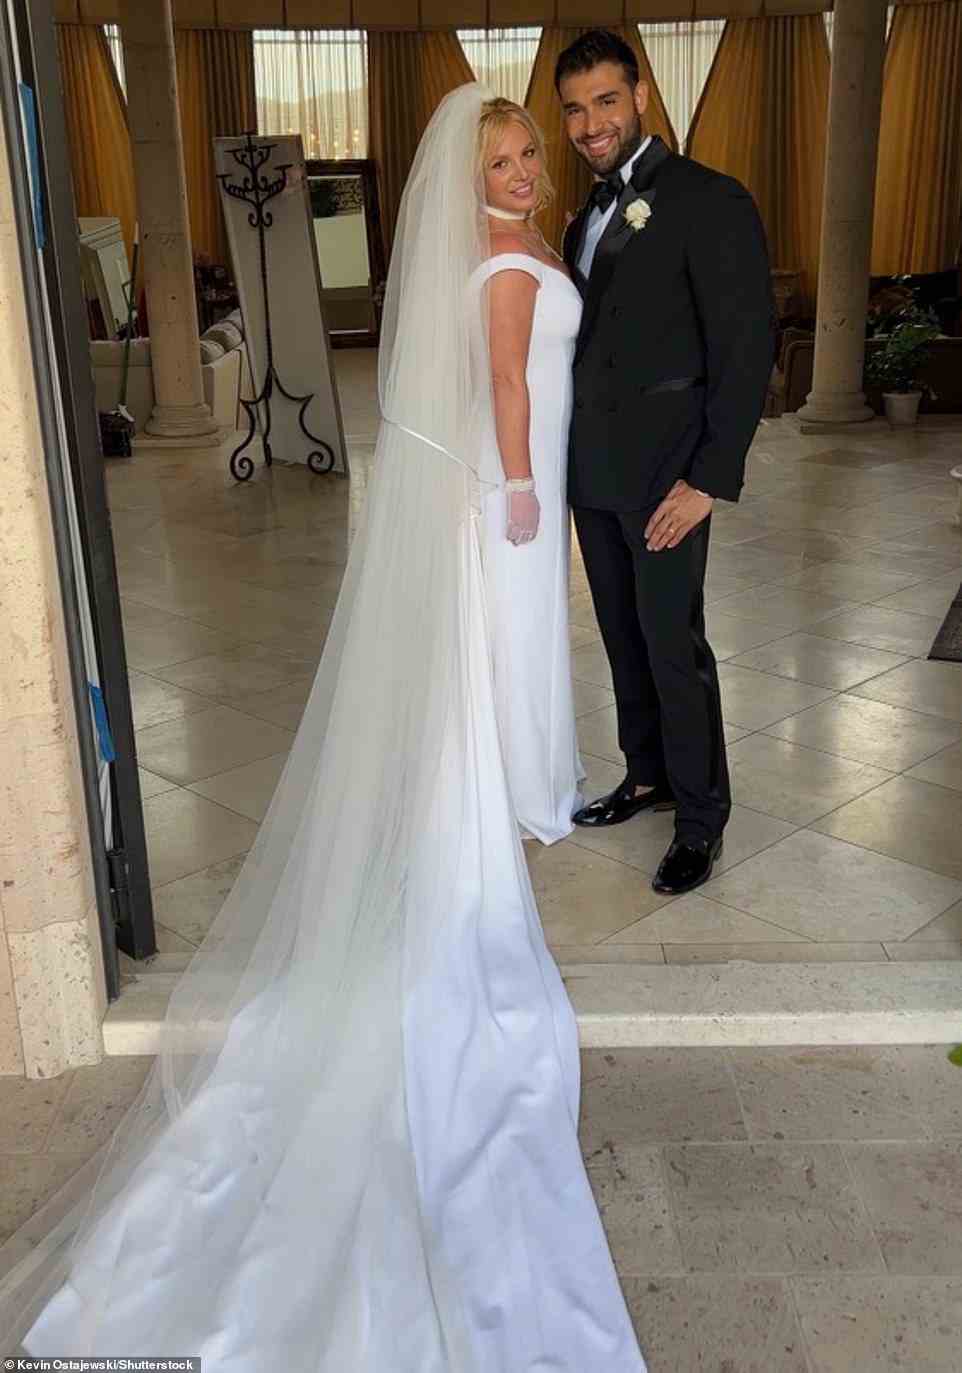 And the bride wore... Versace! Britney Spears was the epitome of bridal chic as she tied the knot in a custom Versace gown on Thursday night, less than a year after getting engaged to her longtime partner Sam Asghari